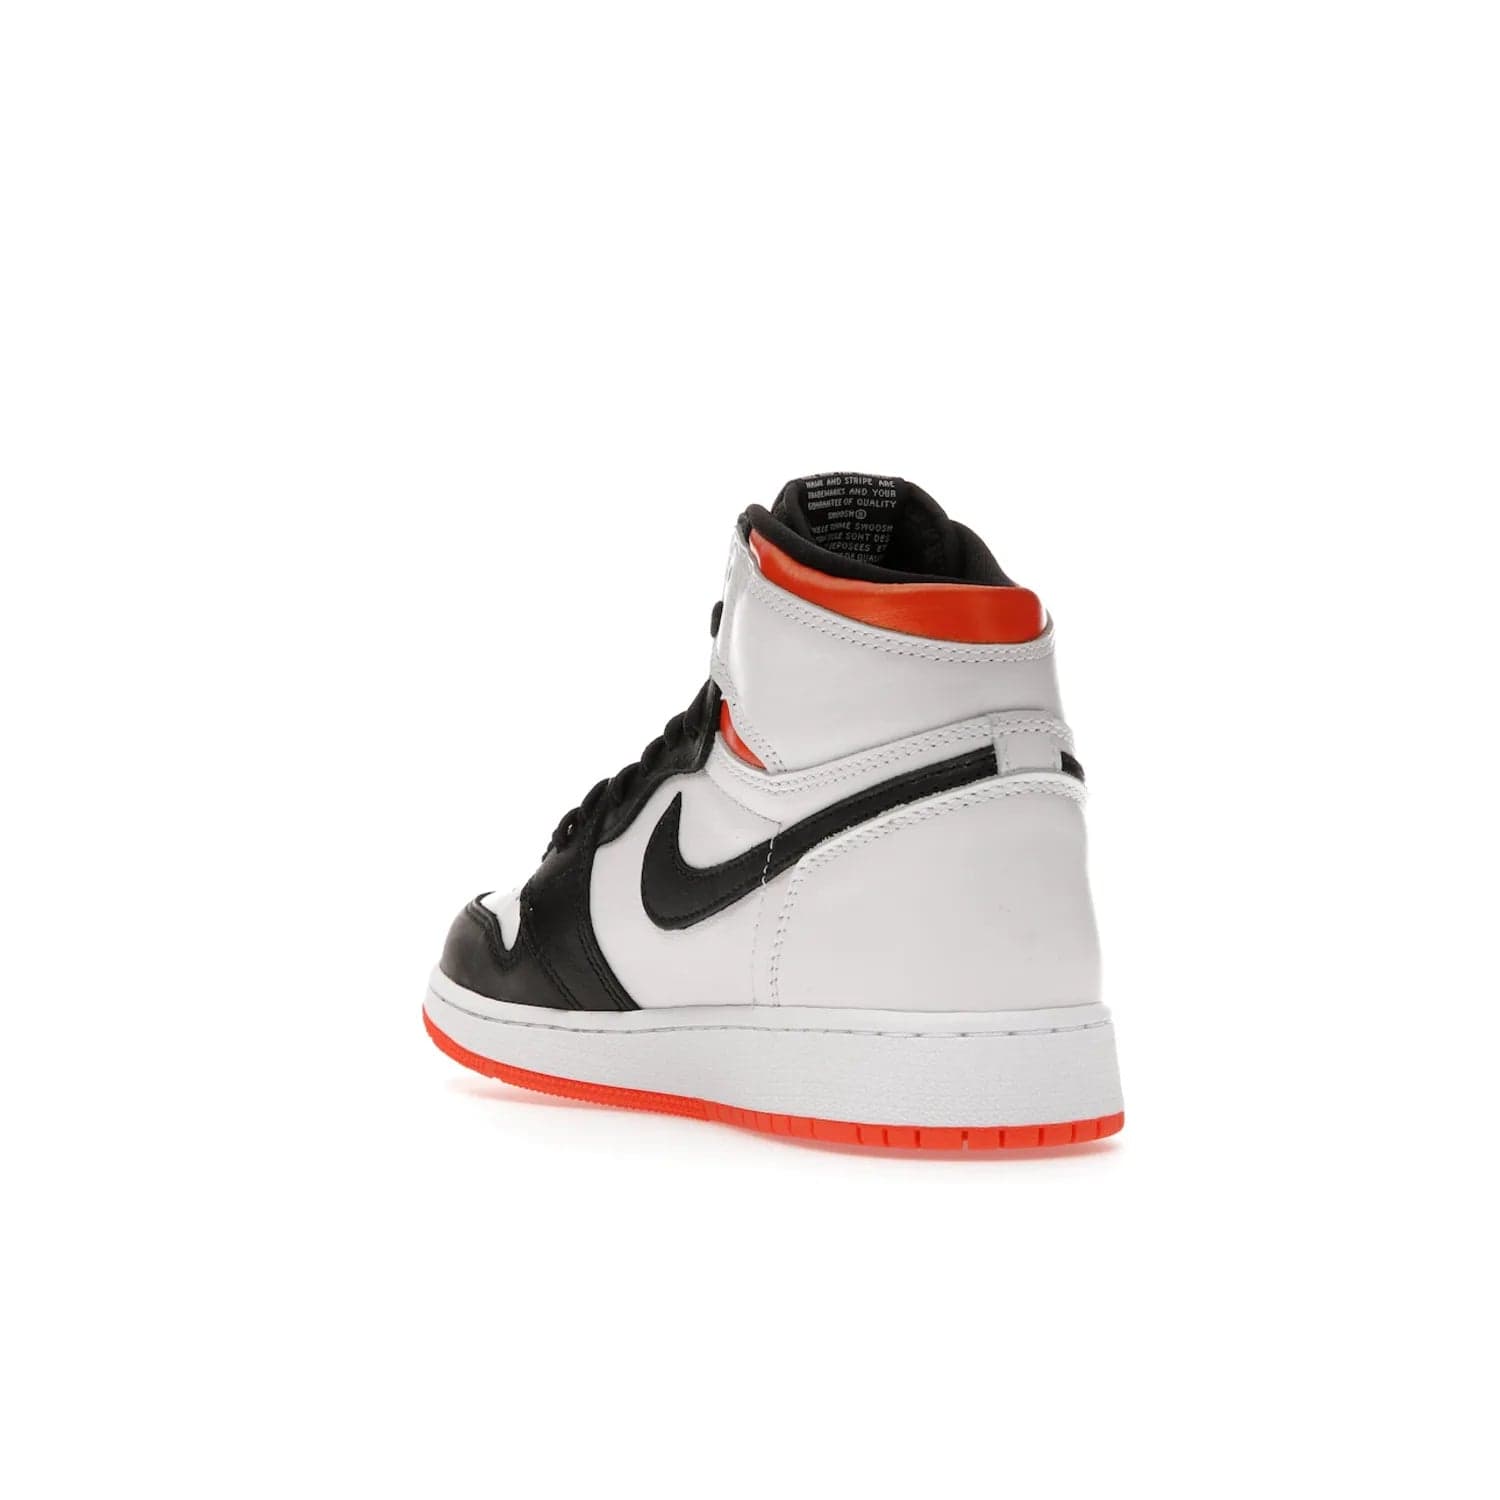 Jordan 1 High OG Electro Orange (GS) - Image 25 - Only at www.BallersClubKickz.com - The Air Jordan 1 High OG Electro Orange GS is the ideal shoe for kids on the go. Featuring white leather uppers, black overlays, and bright orange accents, it's sure to become a favorite. A great mix of classic style and vibrant colors, the shoe delivers air cushioning for comfort and hard orange rubber for grip. Release on July 17th, 2021. Get them a pair today.